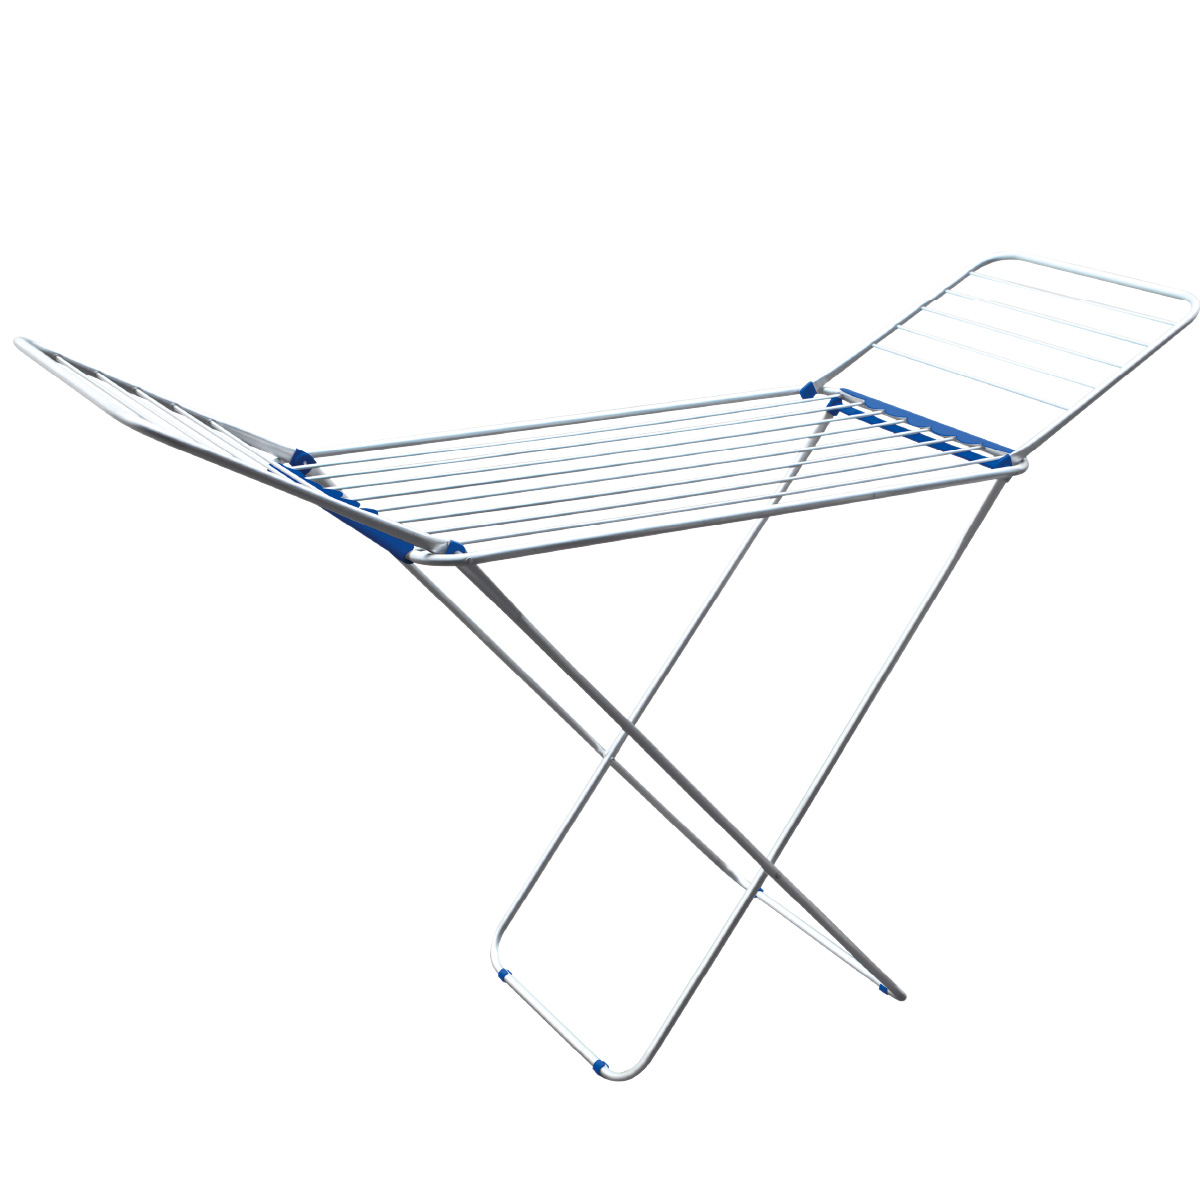 Aluminum clothes drying rack with 2 wings 176x55x92 / 18M